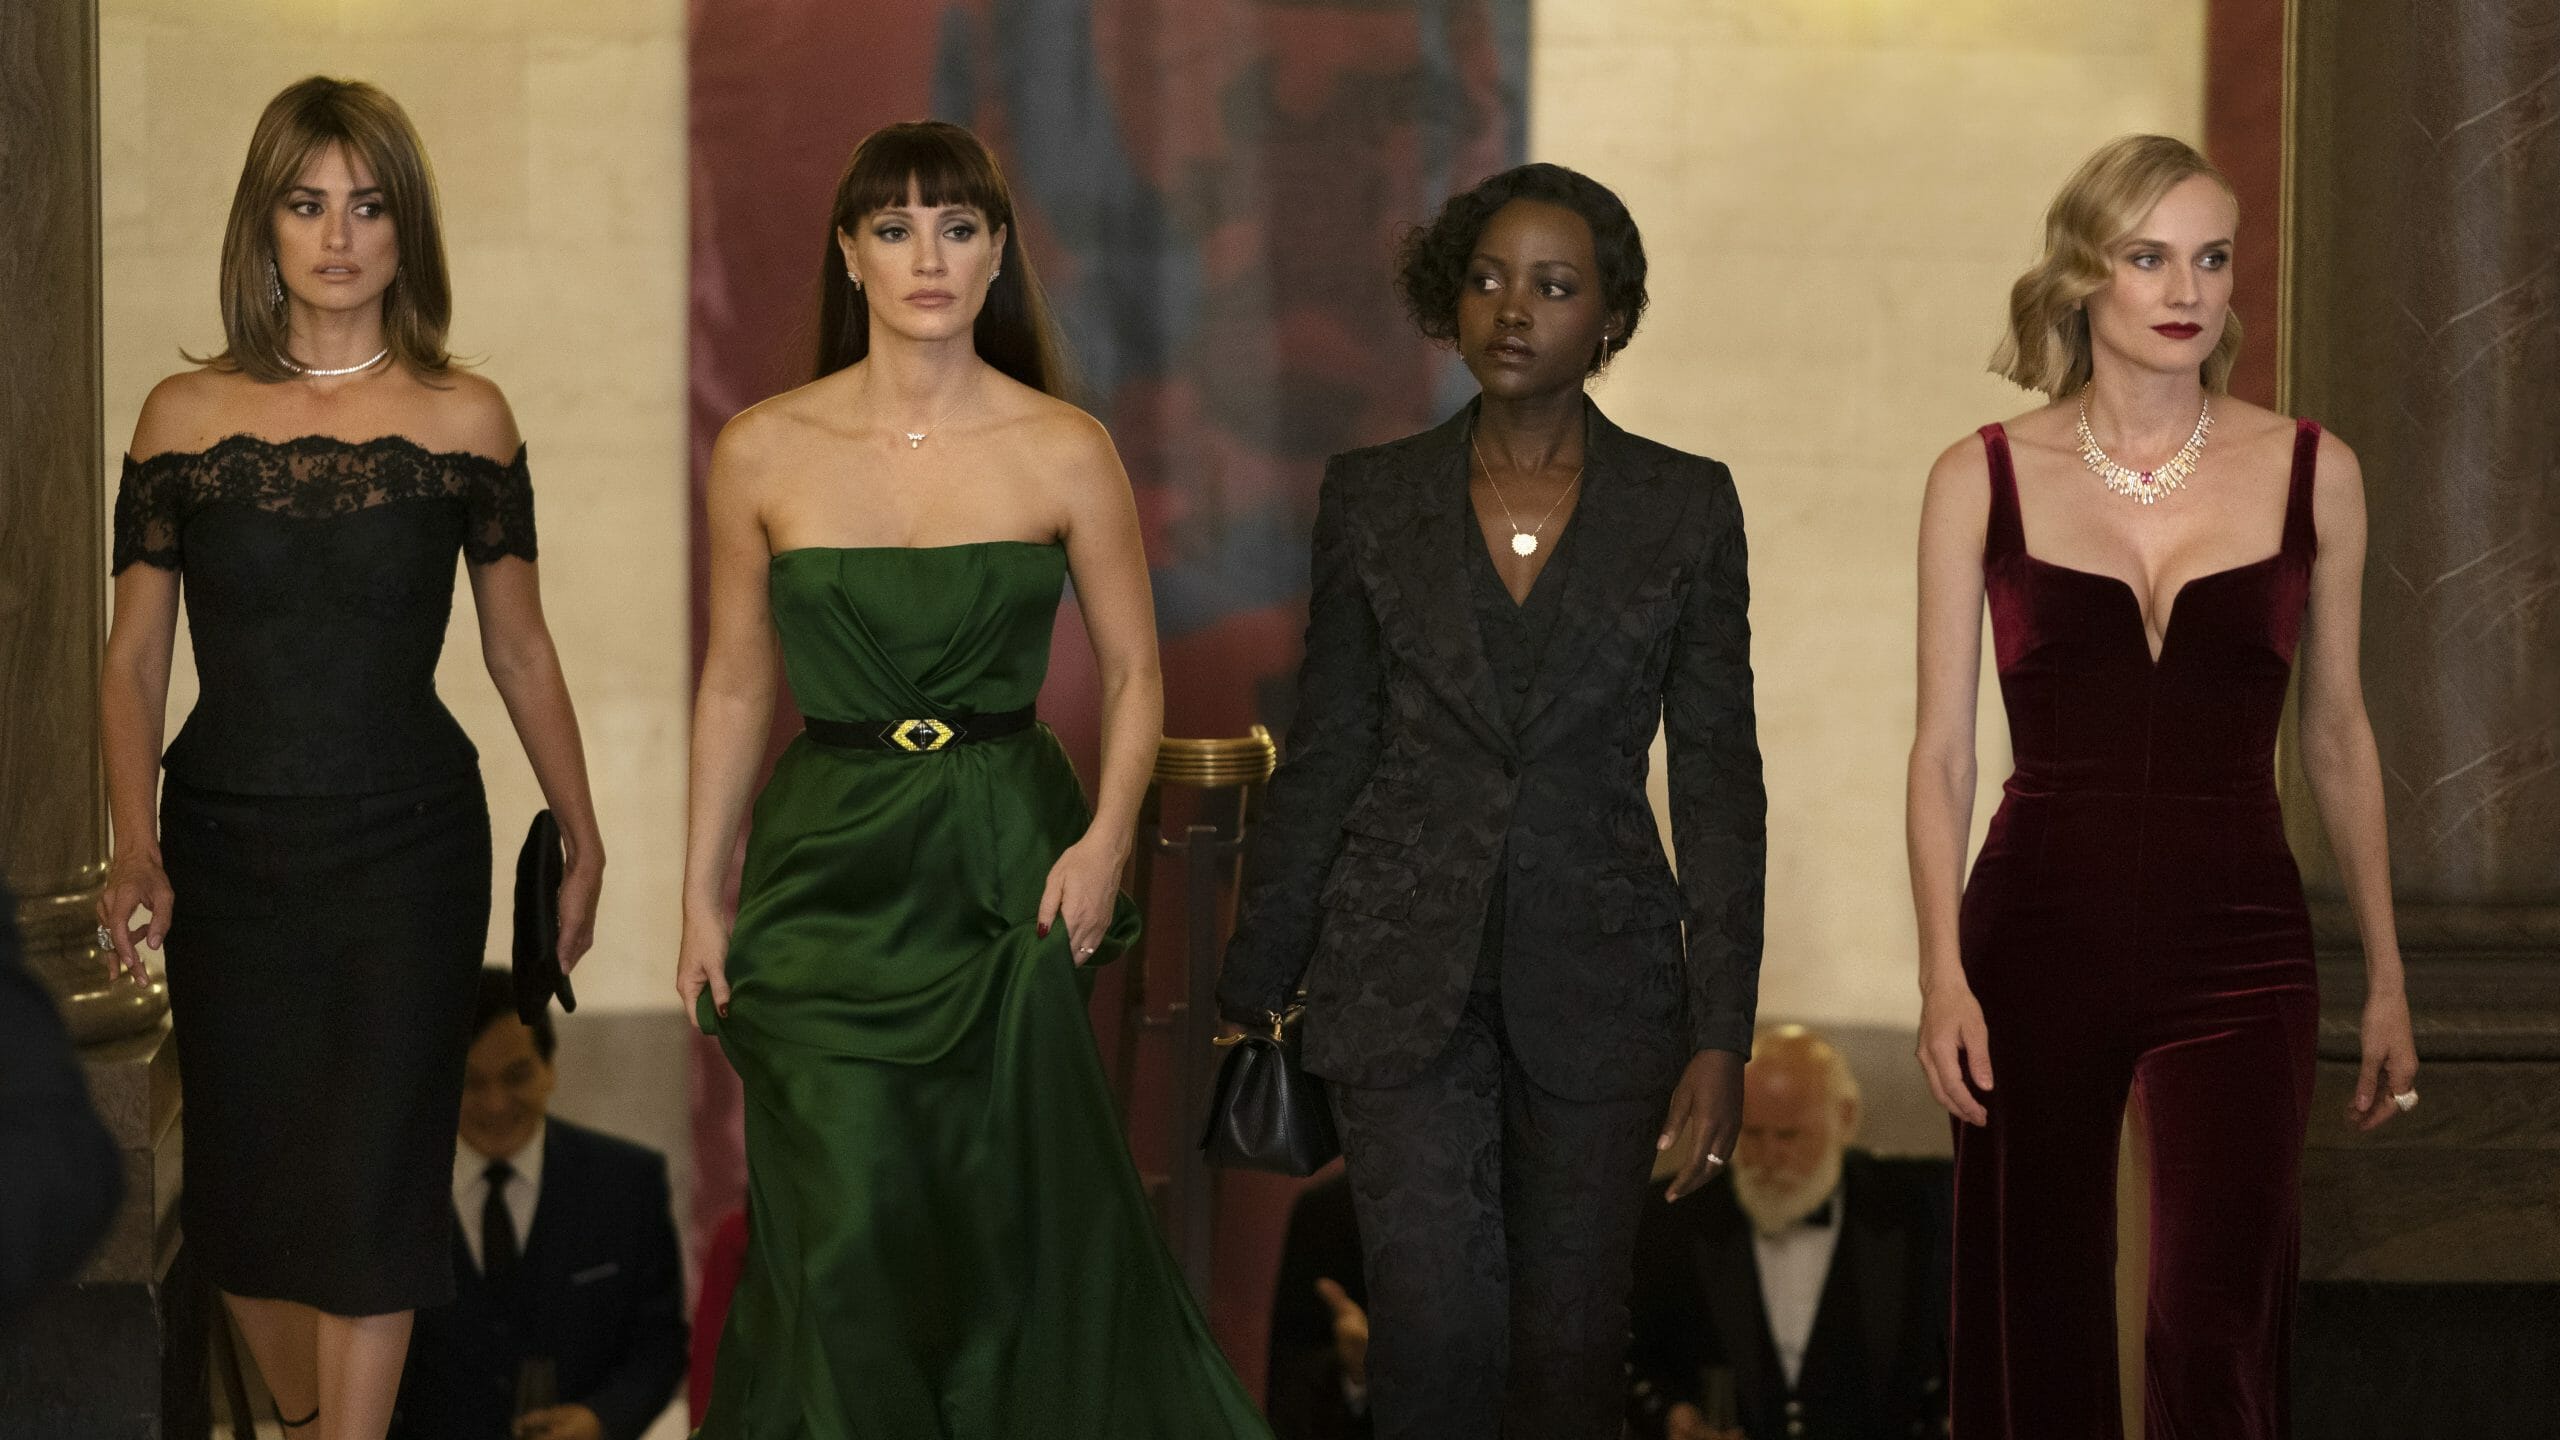 Penélope Cruz, Jessica Chastain, Lupita Nyong'o, and Diane Kruger entering a fancy ball together in disguise in the new all-female spy thriller THE 355.